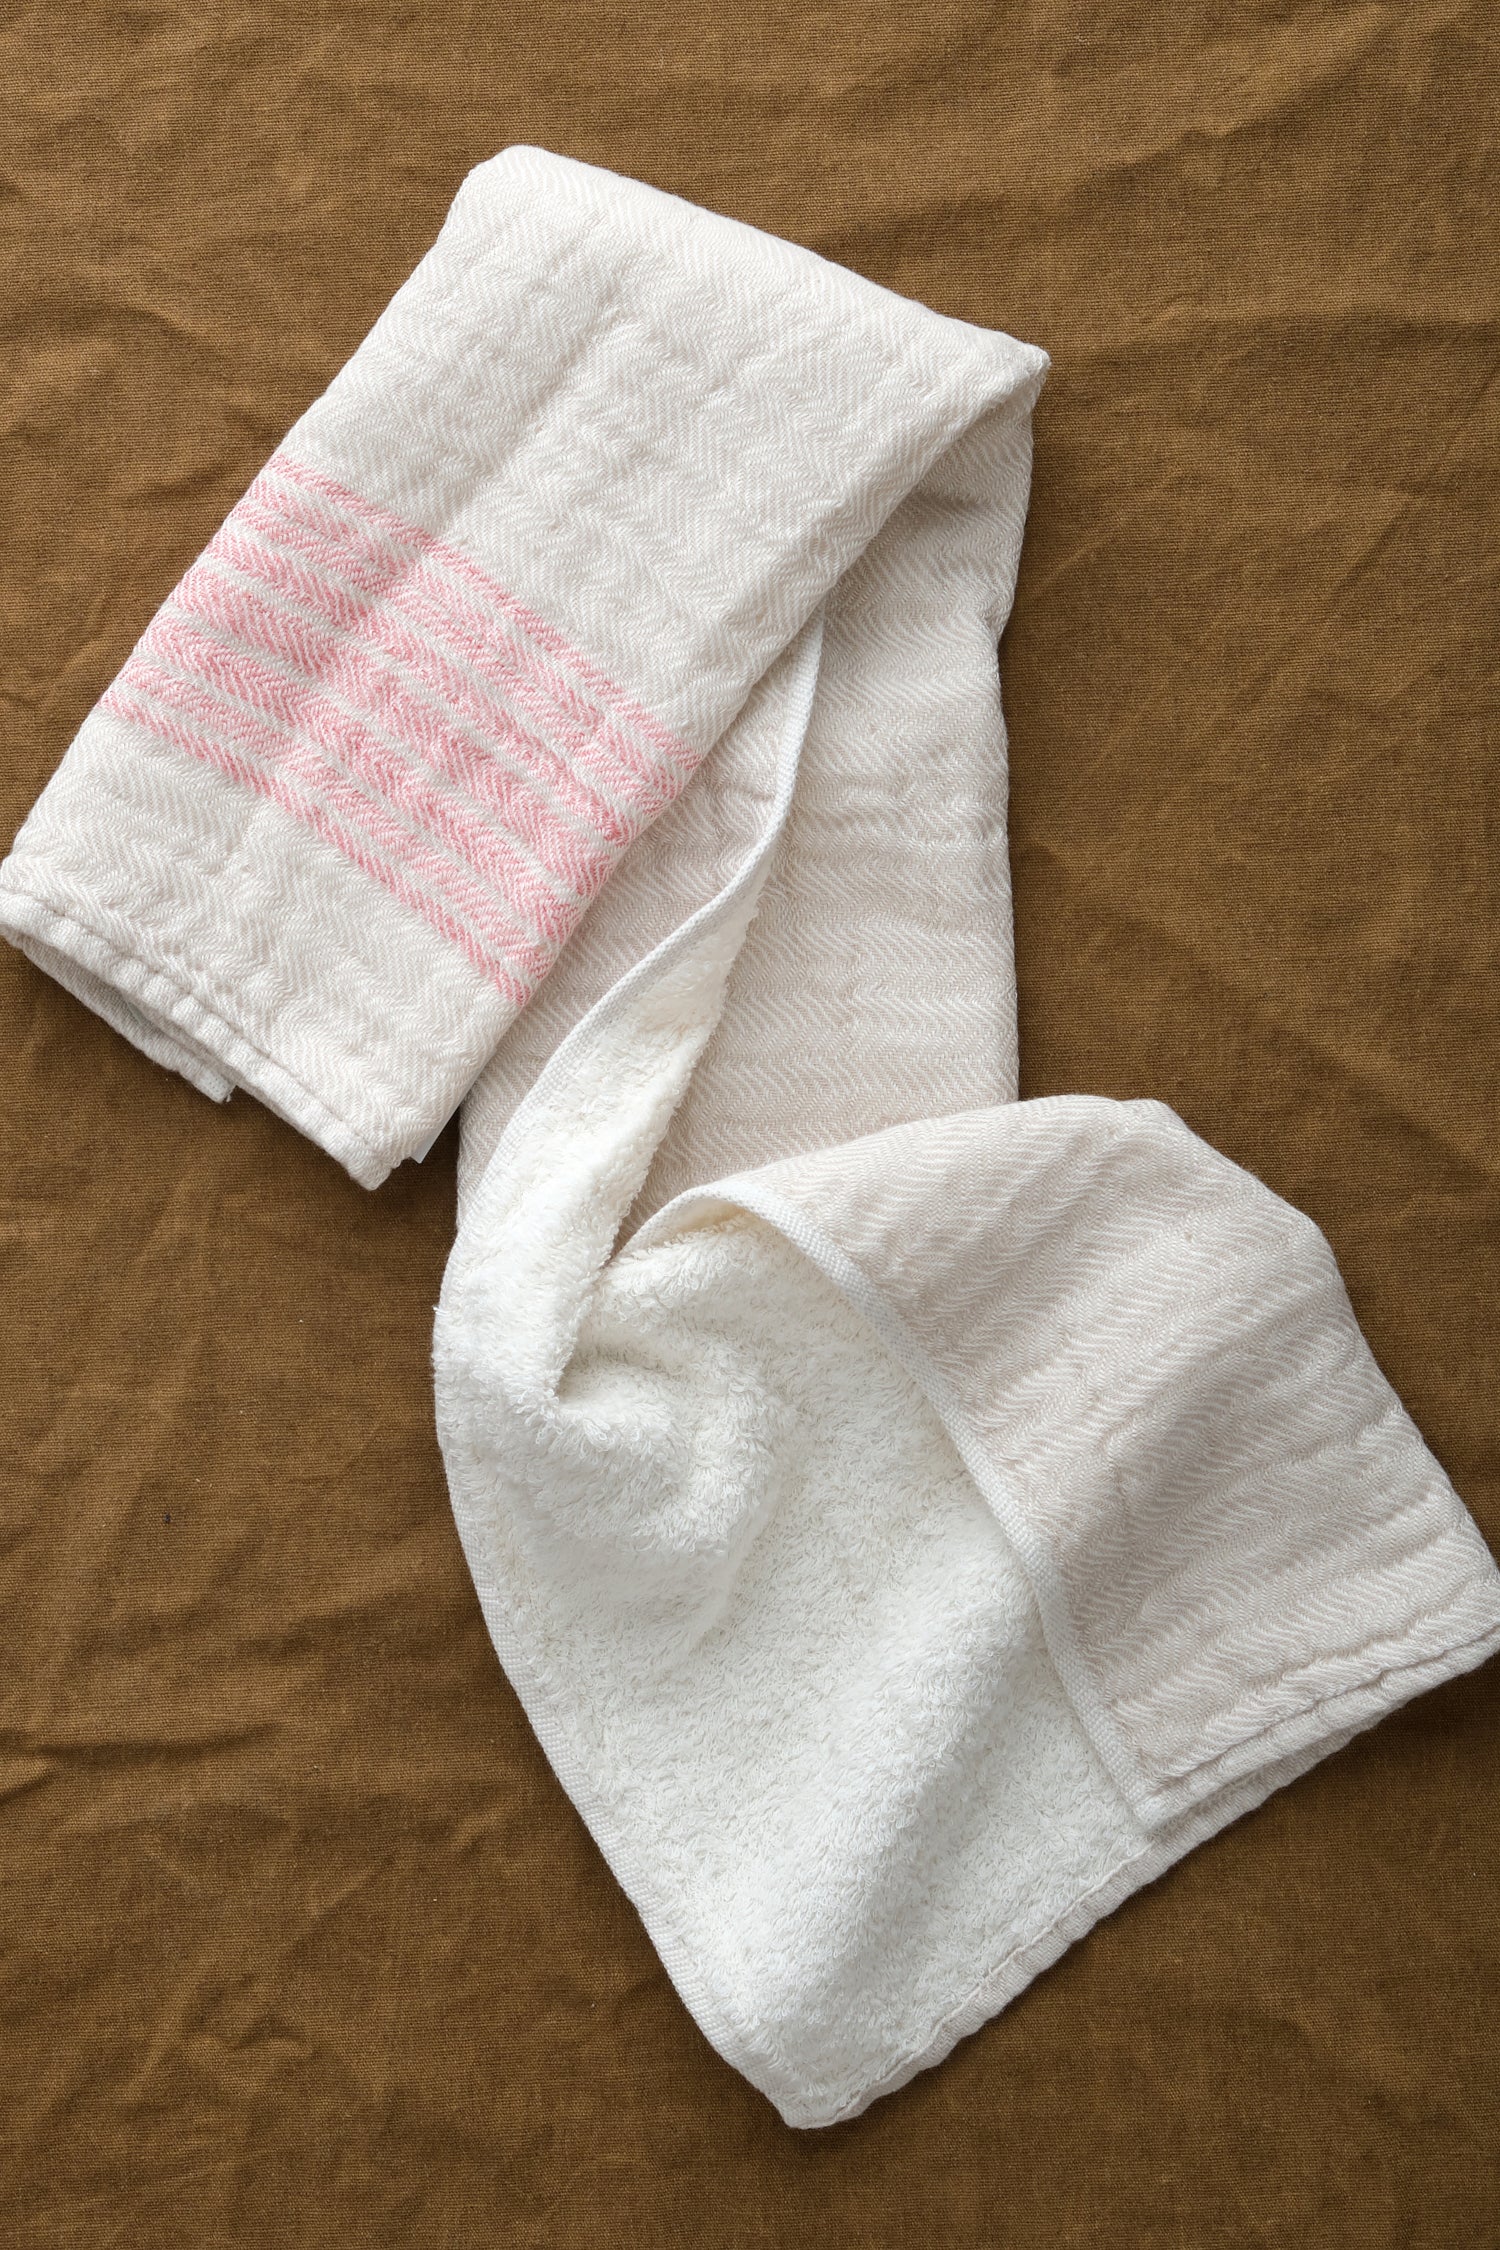 Unfolded Flax Line Hand Towel in Pink/Beige